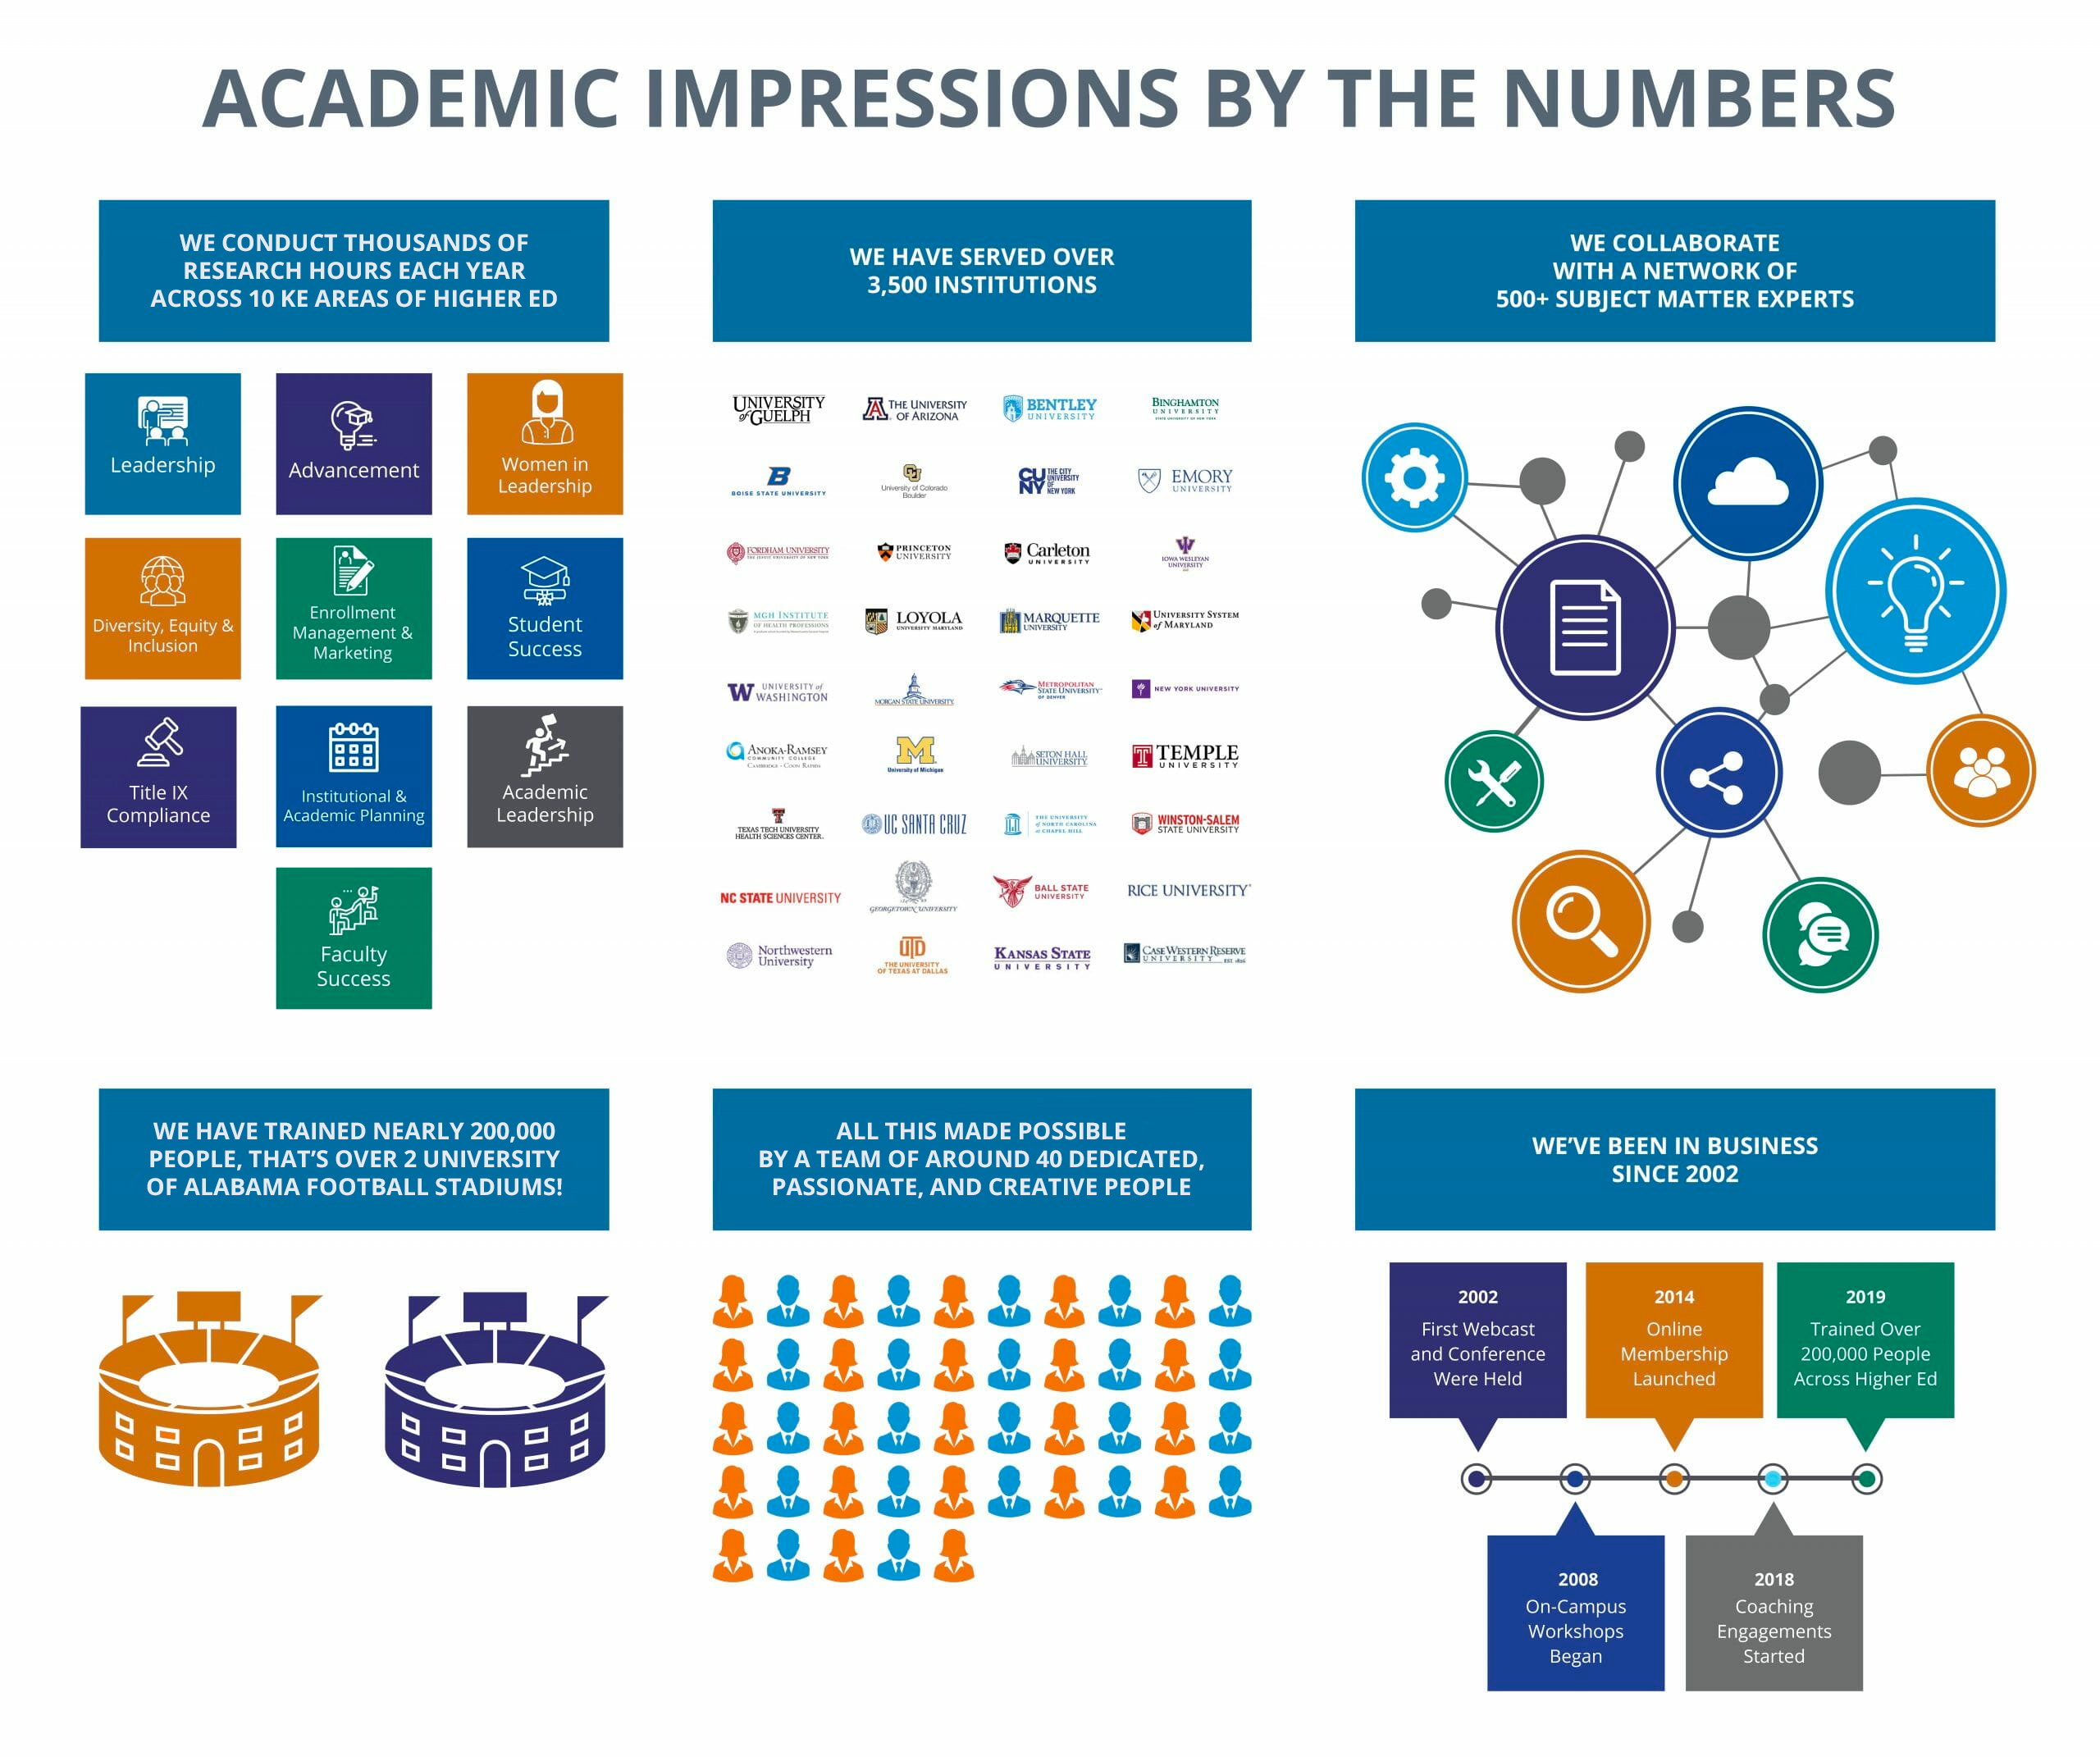 Infographic showing key metrics concerning the history of Academic Impressions